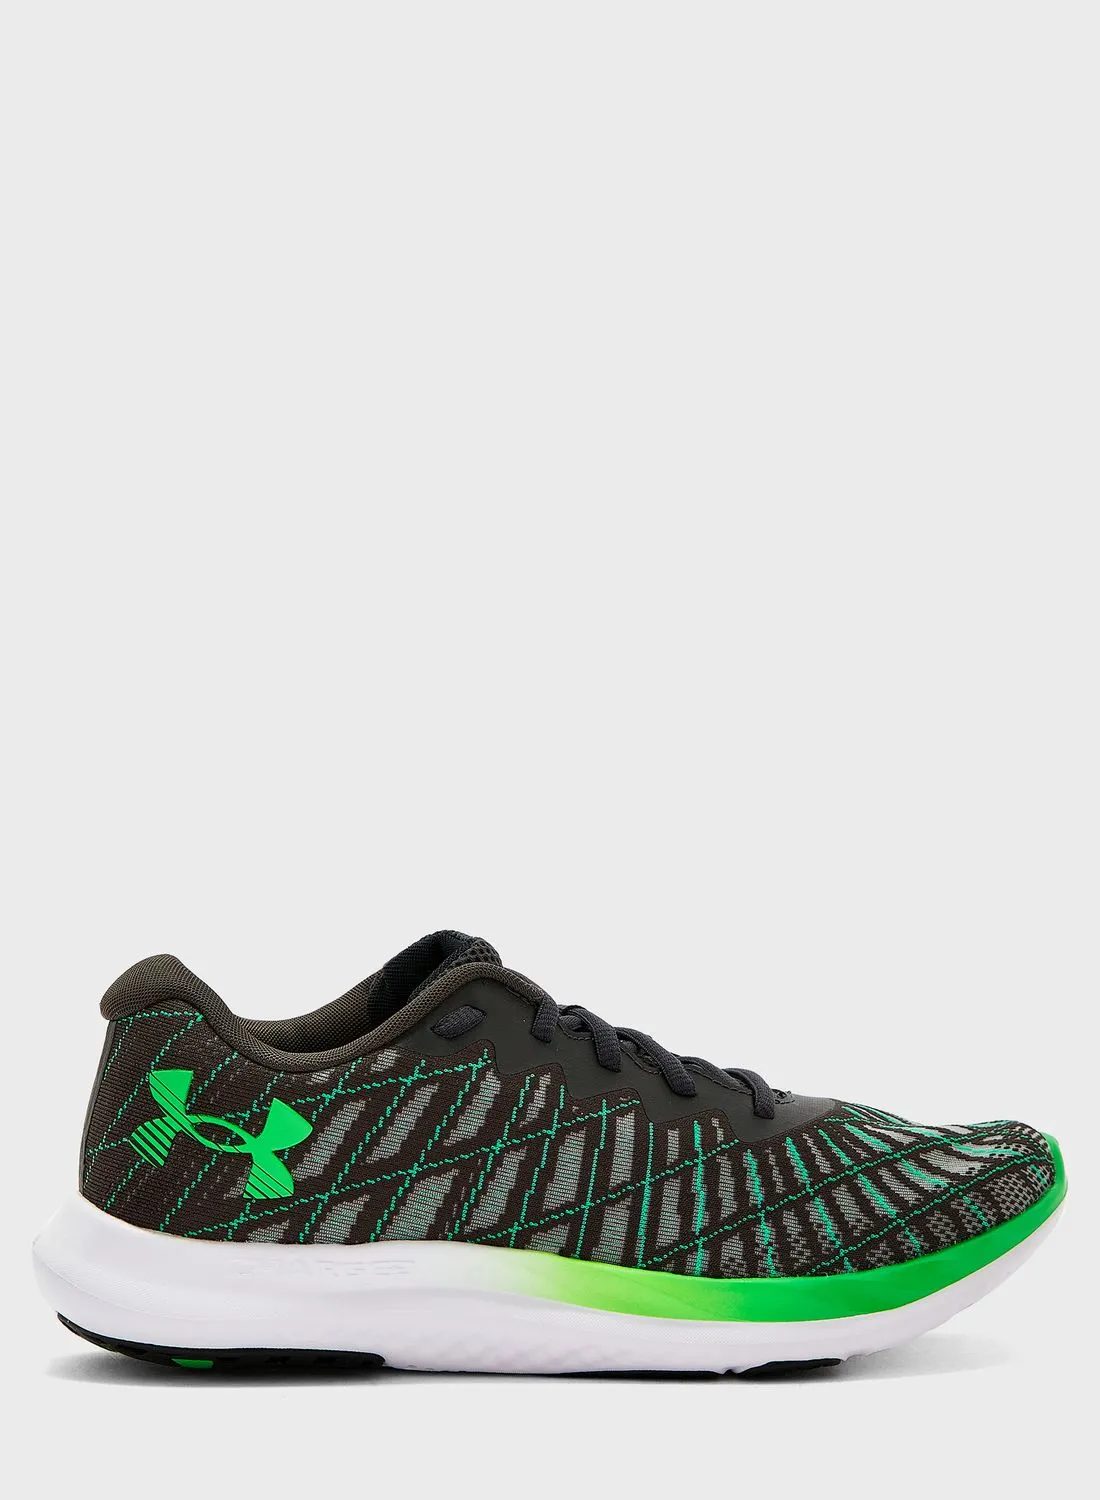 UNDER ARMOUR Charged Breeze 2